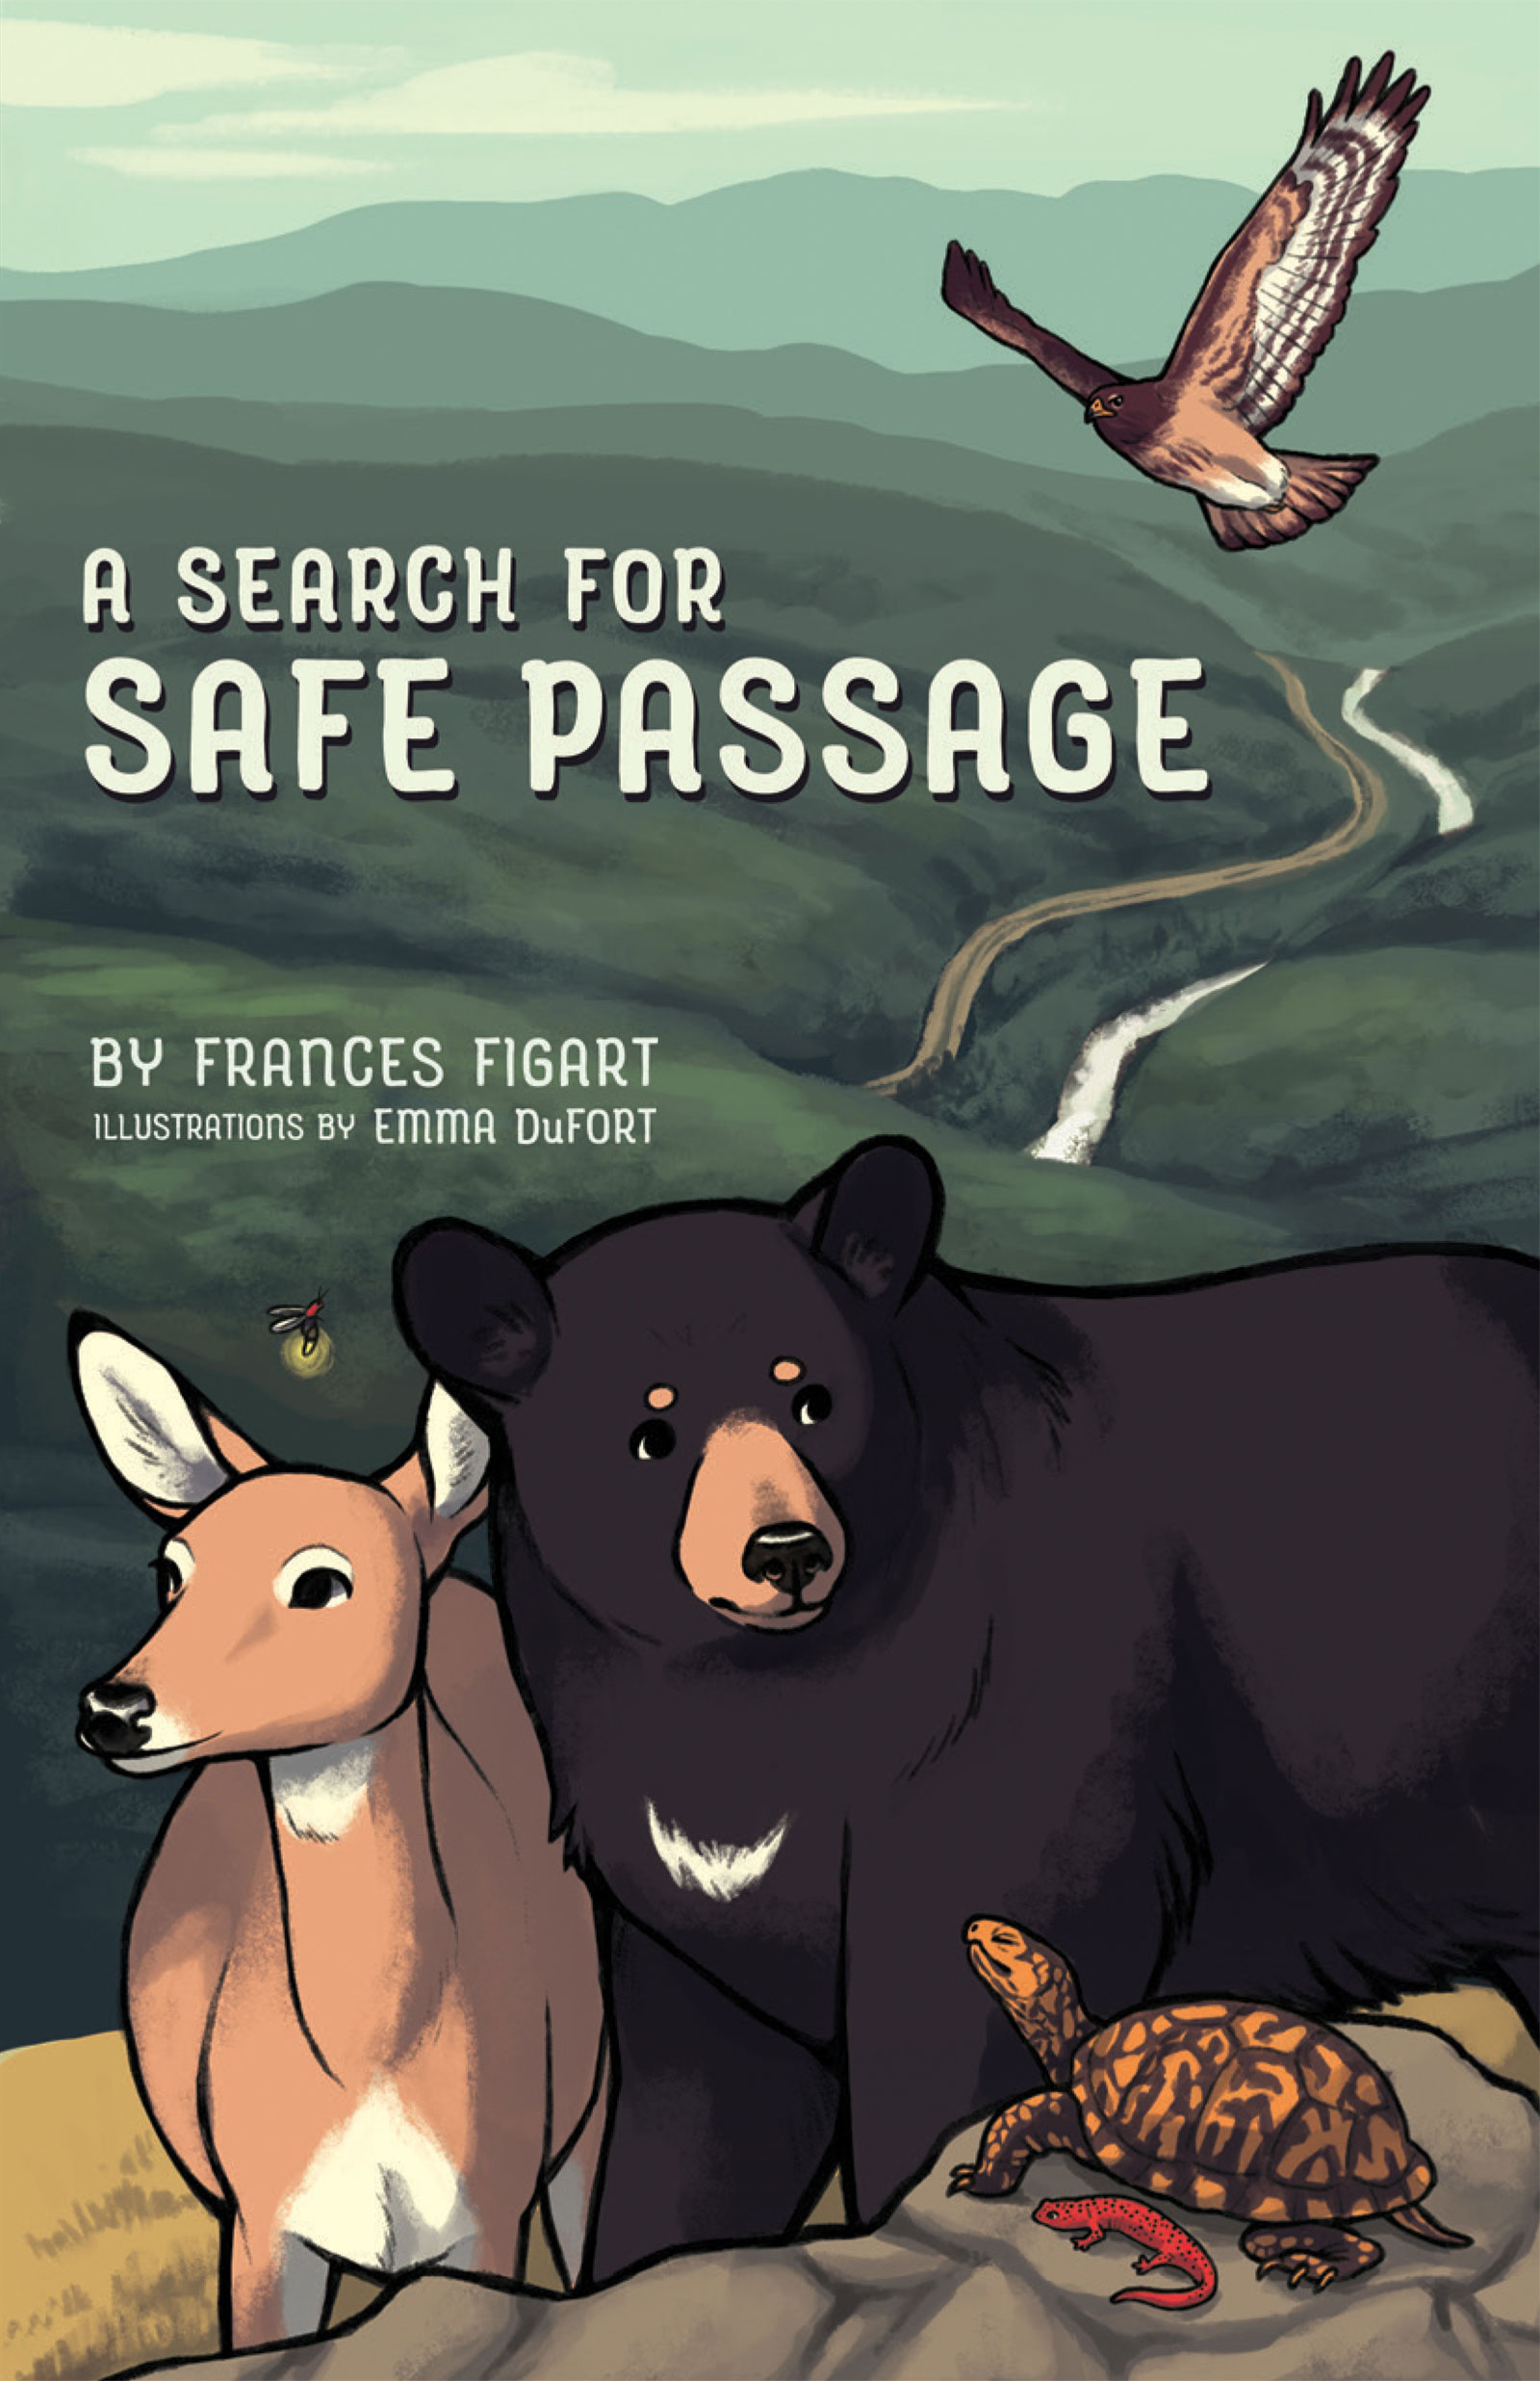 New children’s book shows need for ‘Safe Passage’